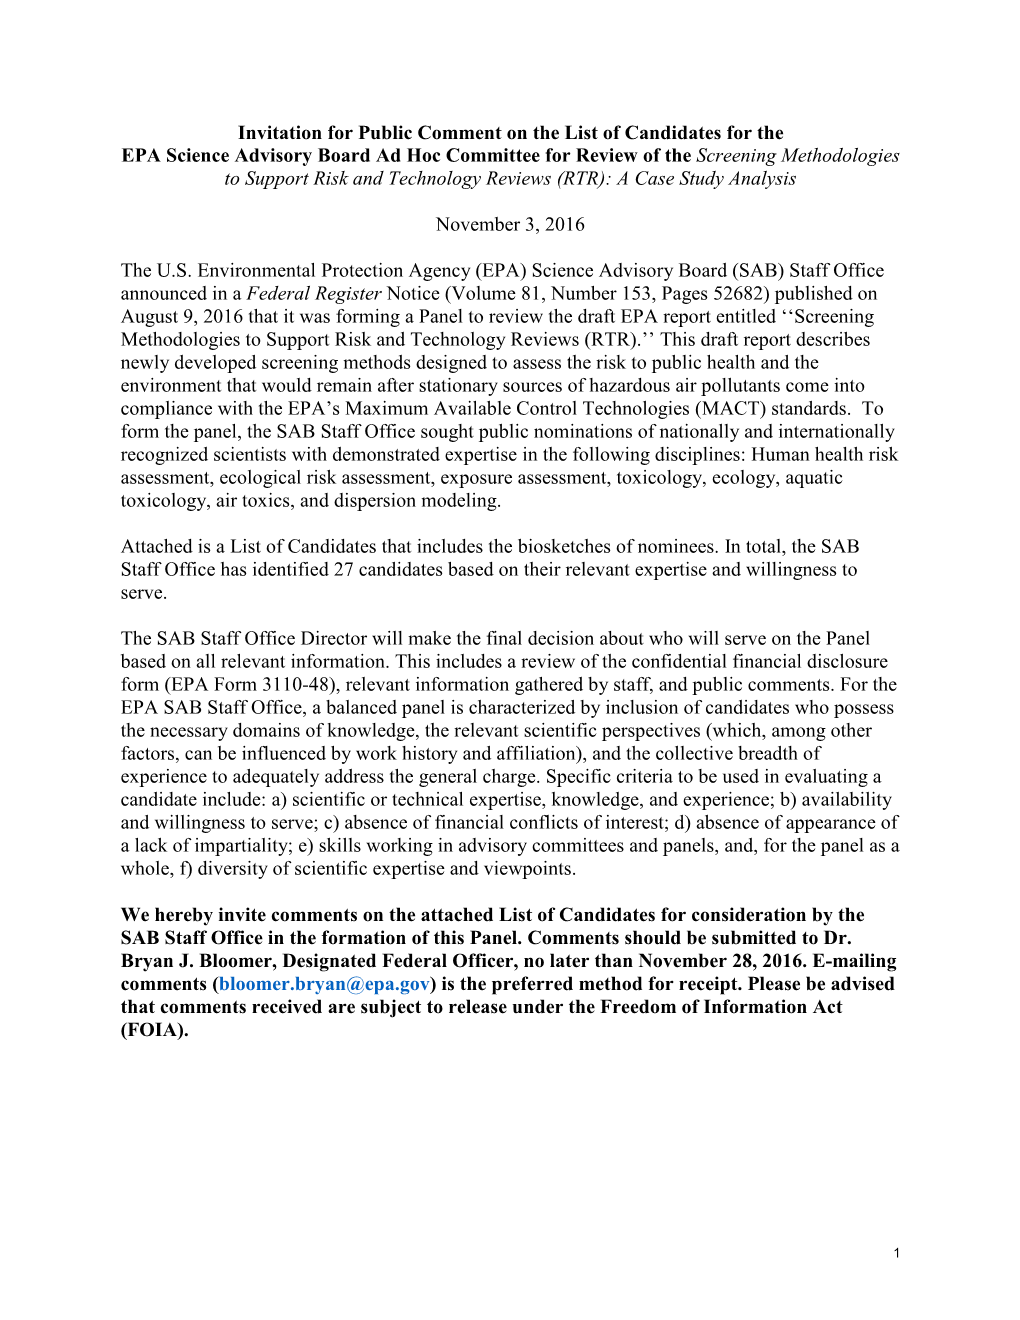 EPA Science Advisory Board Ad Hoc Committee for Review of the Screening Methodologies to Support Risk and Technology Reviews (RTR): a Case Study Analysis